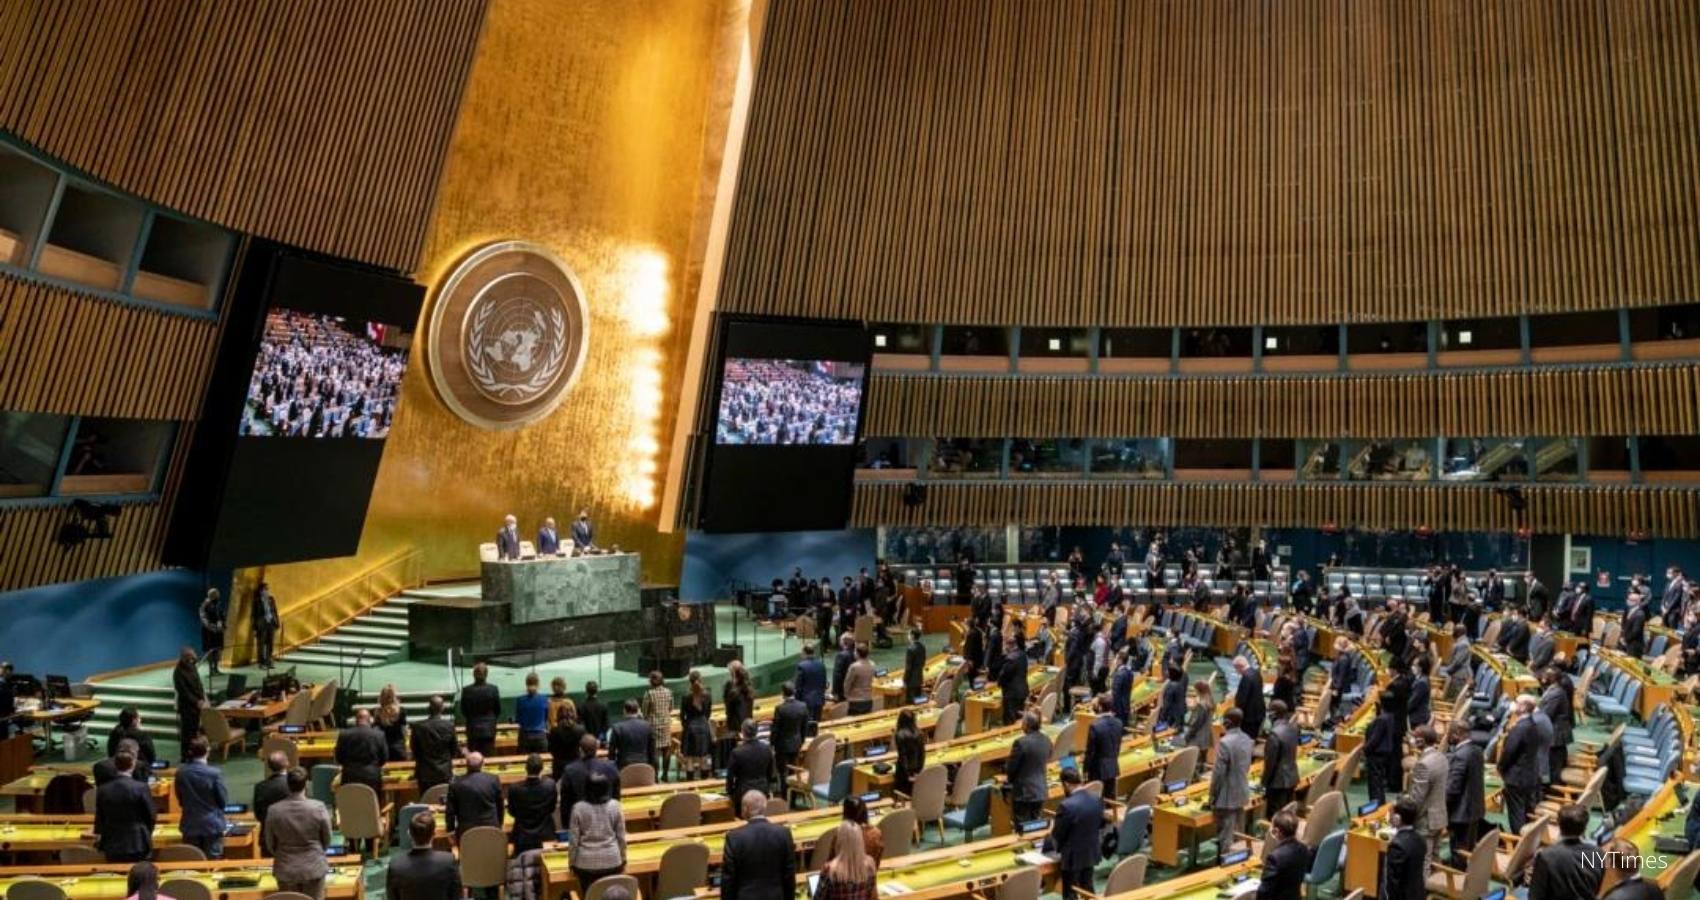 UN To Host Over 190 World Leaders – Despite Threats From A Deadly New Covid-19 Variant